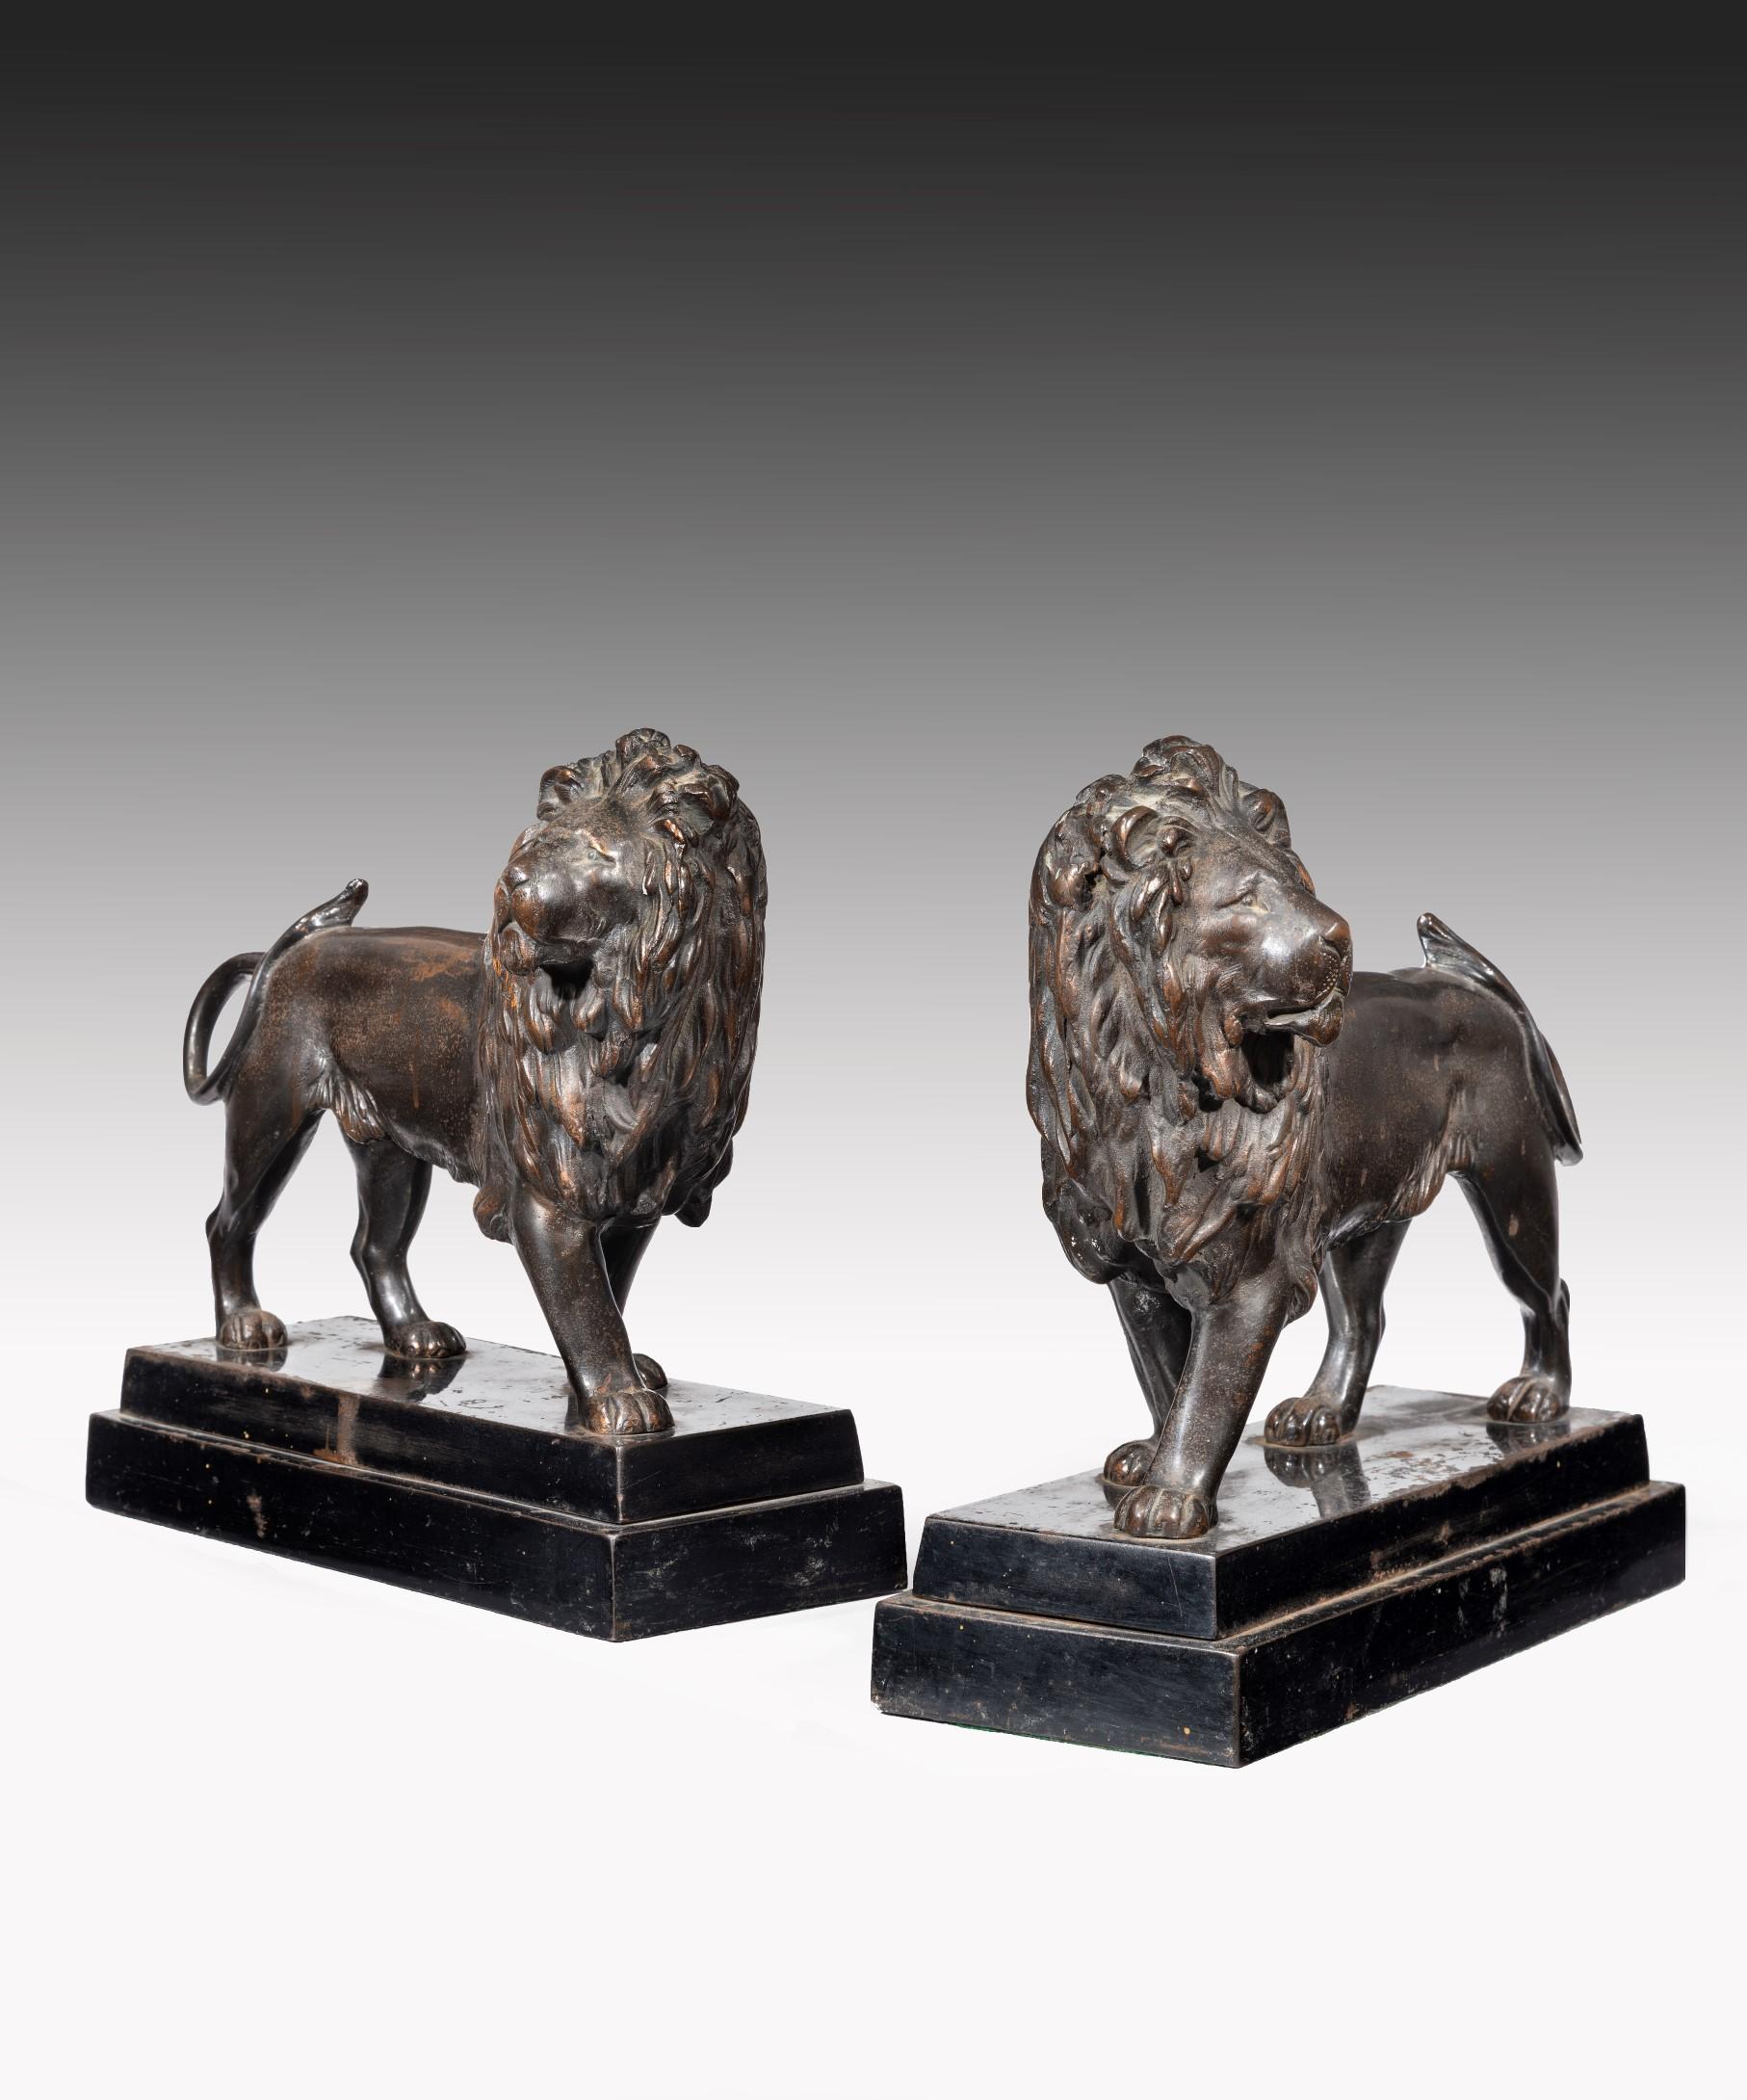 A handsome pair of early 19th century Regency period cast iron lions; the lions with long, shaggy manes and twirling tails are standing on their original stepped plinths.